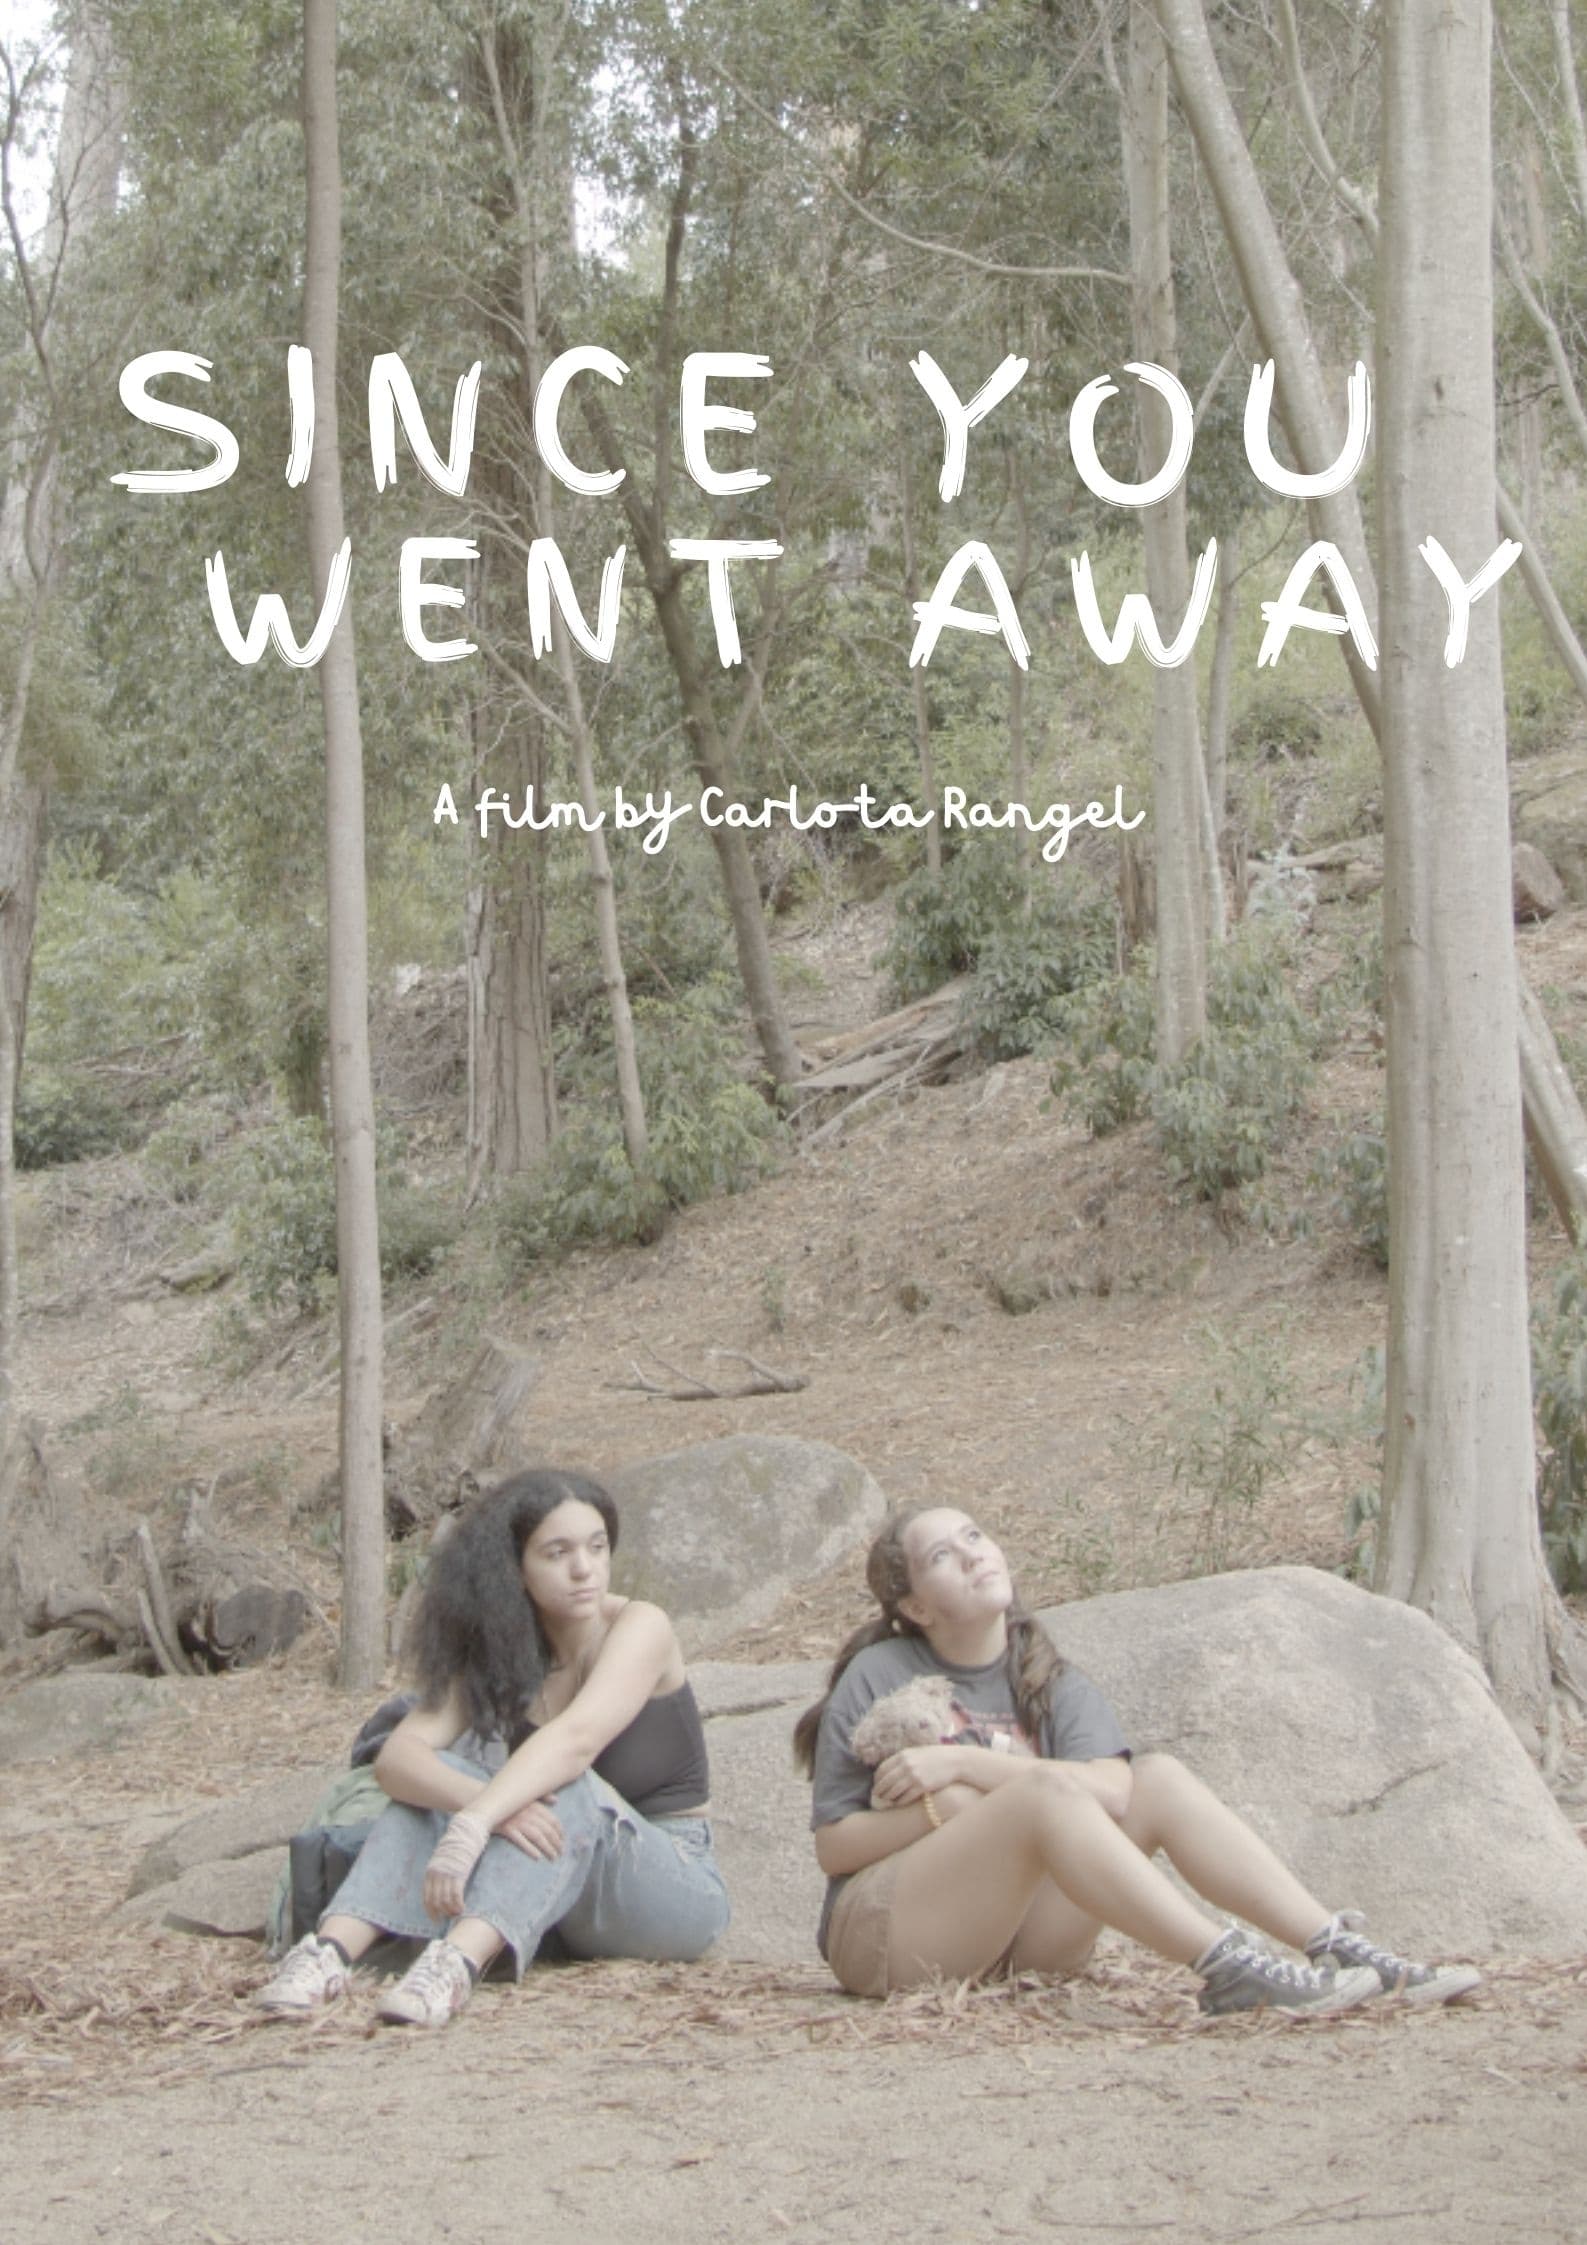 Since You Went Away